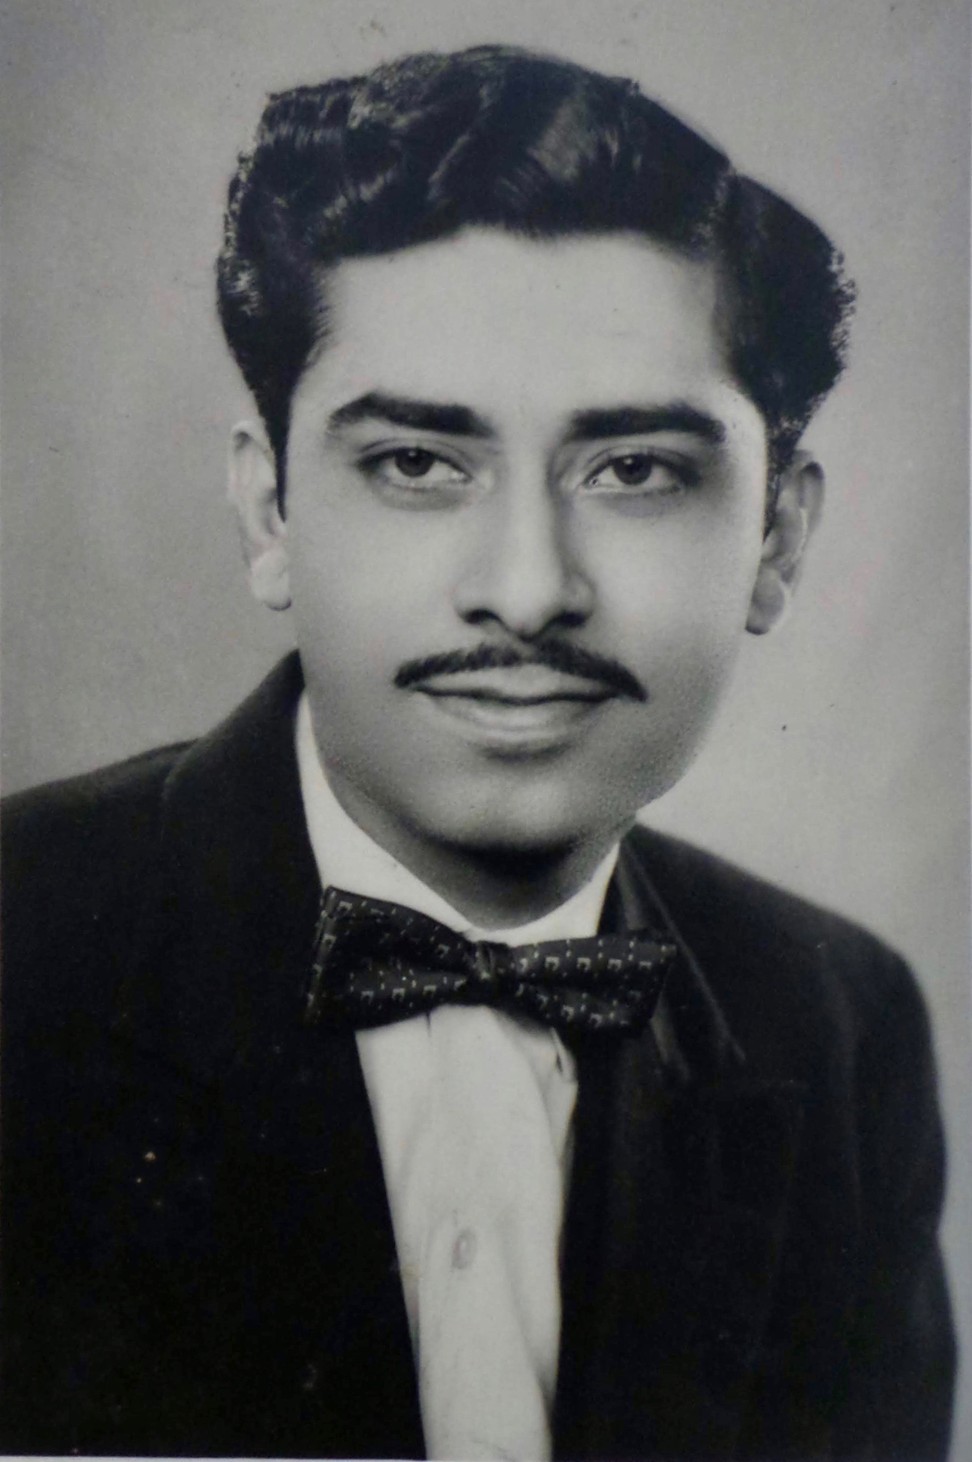 Daswani in 1956 before his performance on India’s Republic Day.